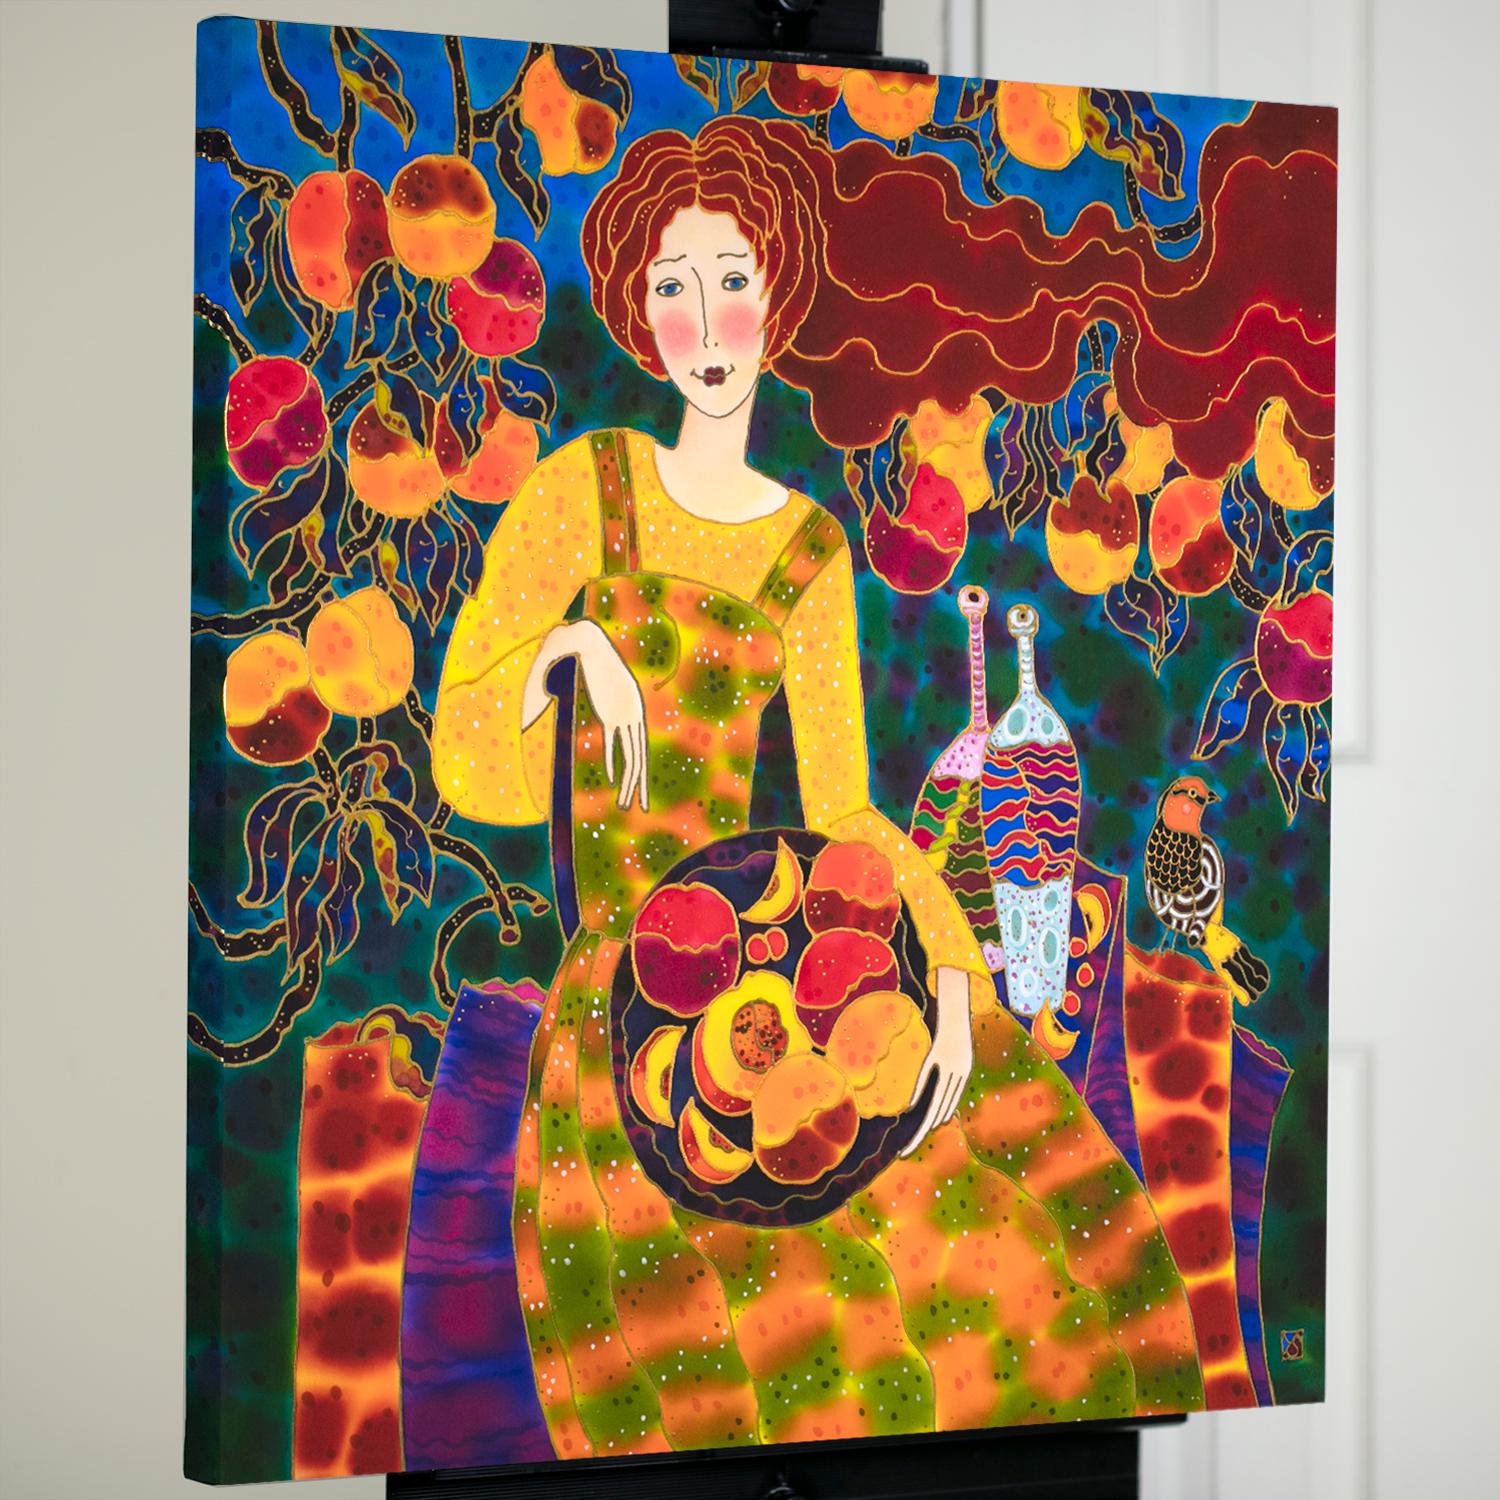 <p>Artist Comments<br>A redhead girl sits with her basketful of peaches, enjoying her bountiful harvest. This artwork is part of artist Yelena Sidorova's Figurative series, known for its bright autumn colors. It celebrates the distinctive qualities